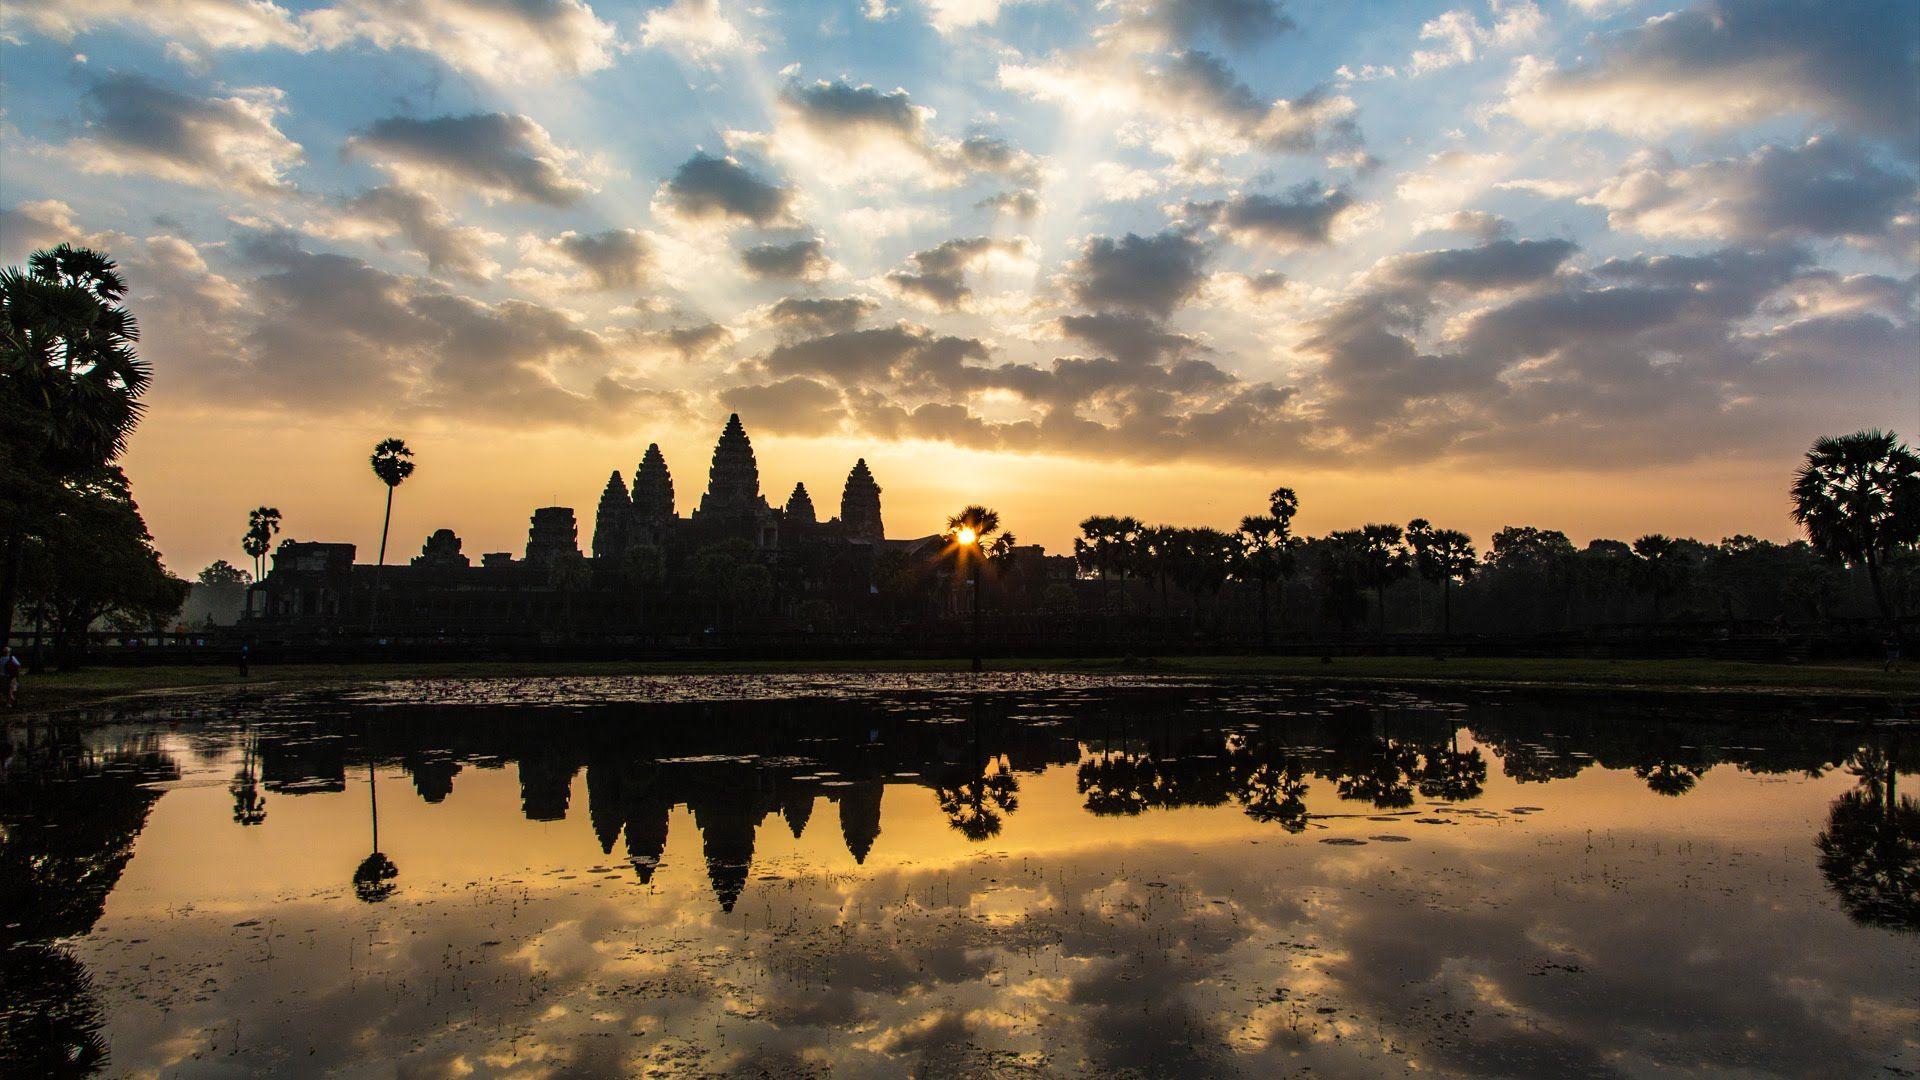 South East Asia. Angkor Wat, Cambodia. Adventure Travel & Tours